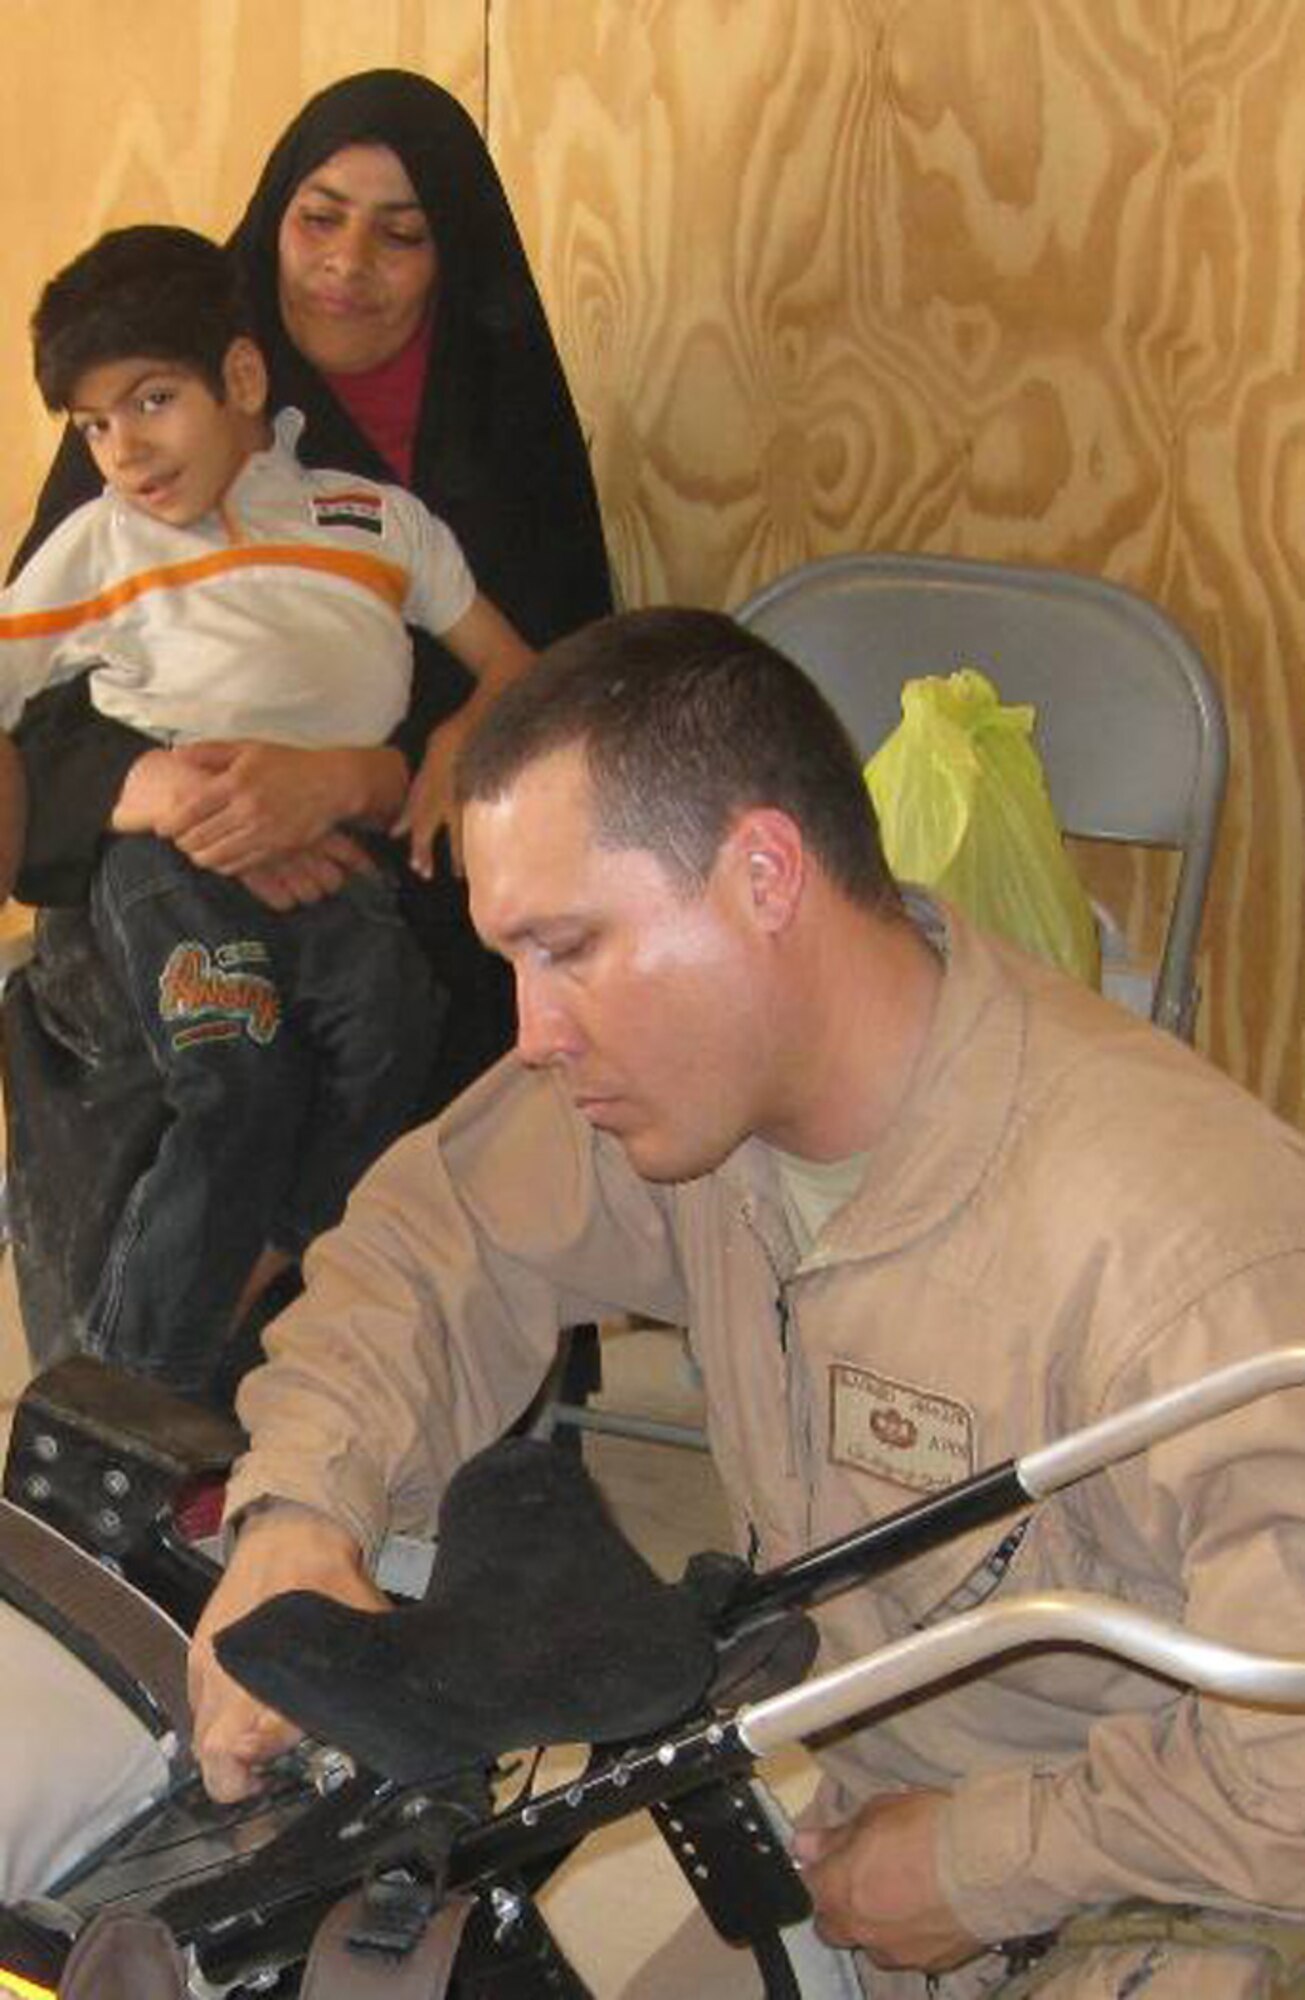 In this undated photo, an Airman helps custom fit a pediatric wheelchair for an Iraqi child. A C-130 aircrew from the Air Force Reserve's 302nd Airlift Wing, Peterson Air Force Base, Colo., flew wheelchairs like this one to Andrews AFB, Md., where another plane took the wheelchairs to Baghdad, Iraq. (Courtesy photo/Brad Blasuer)